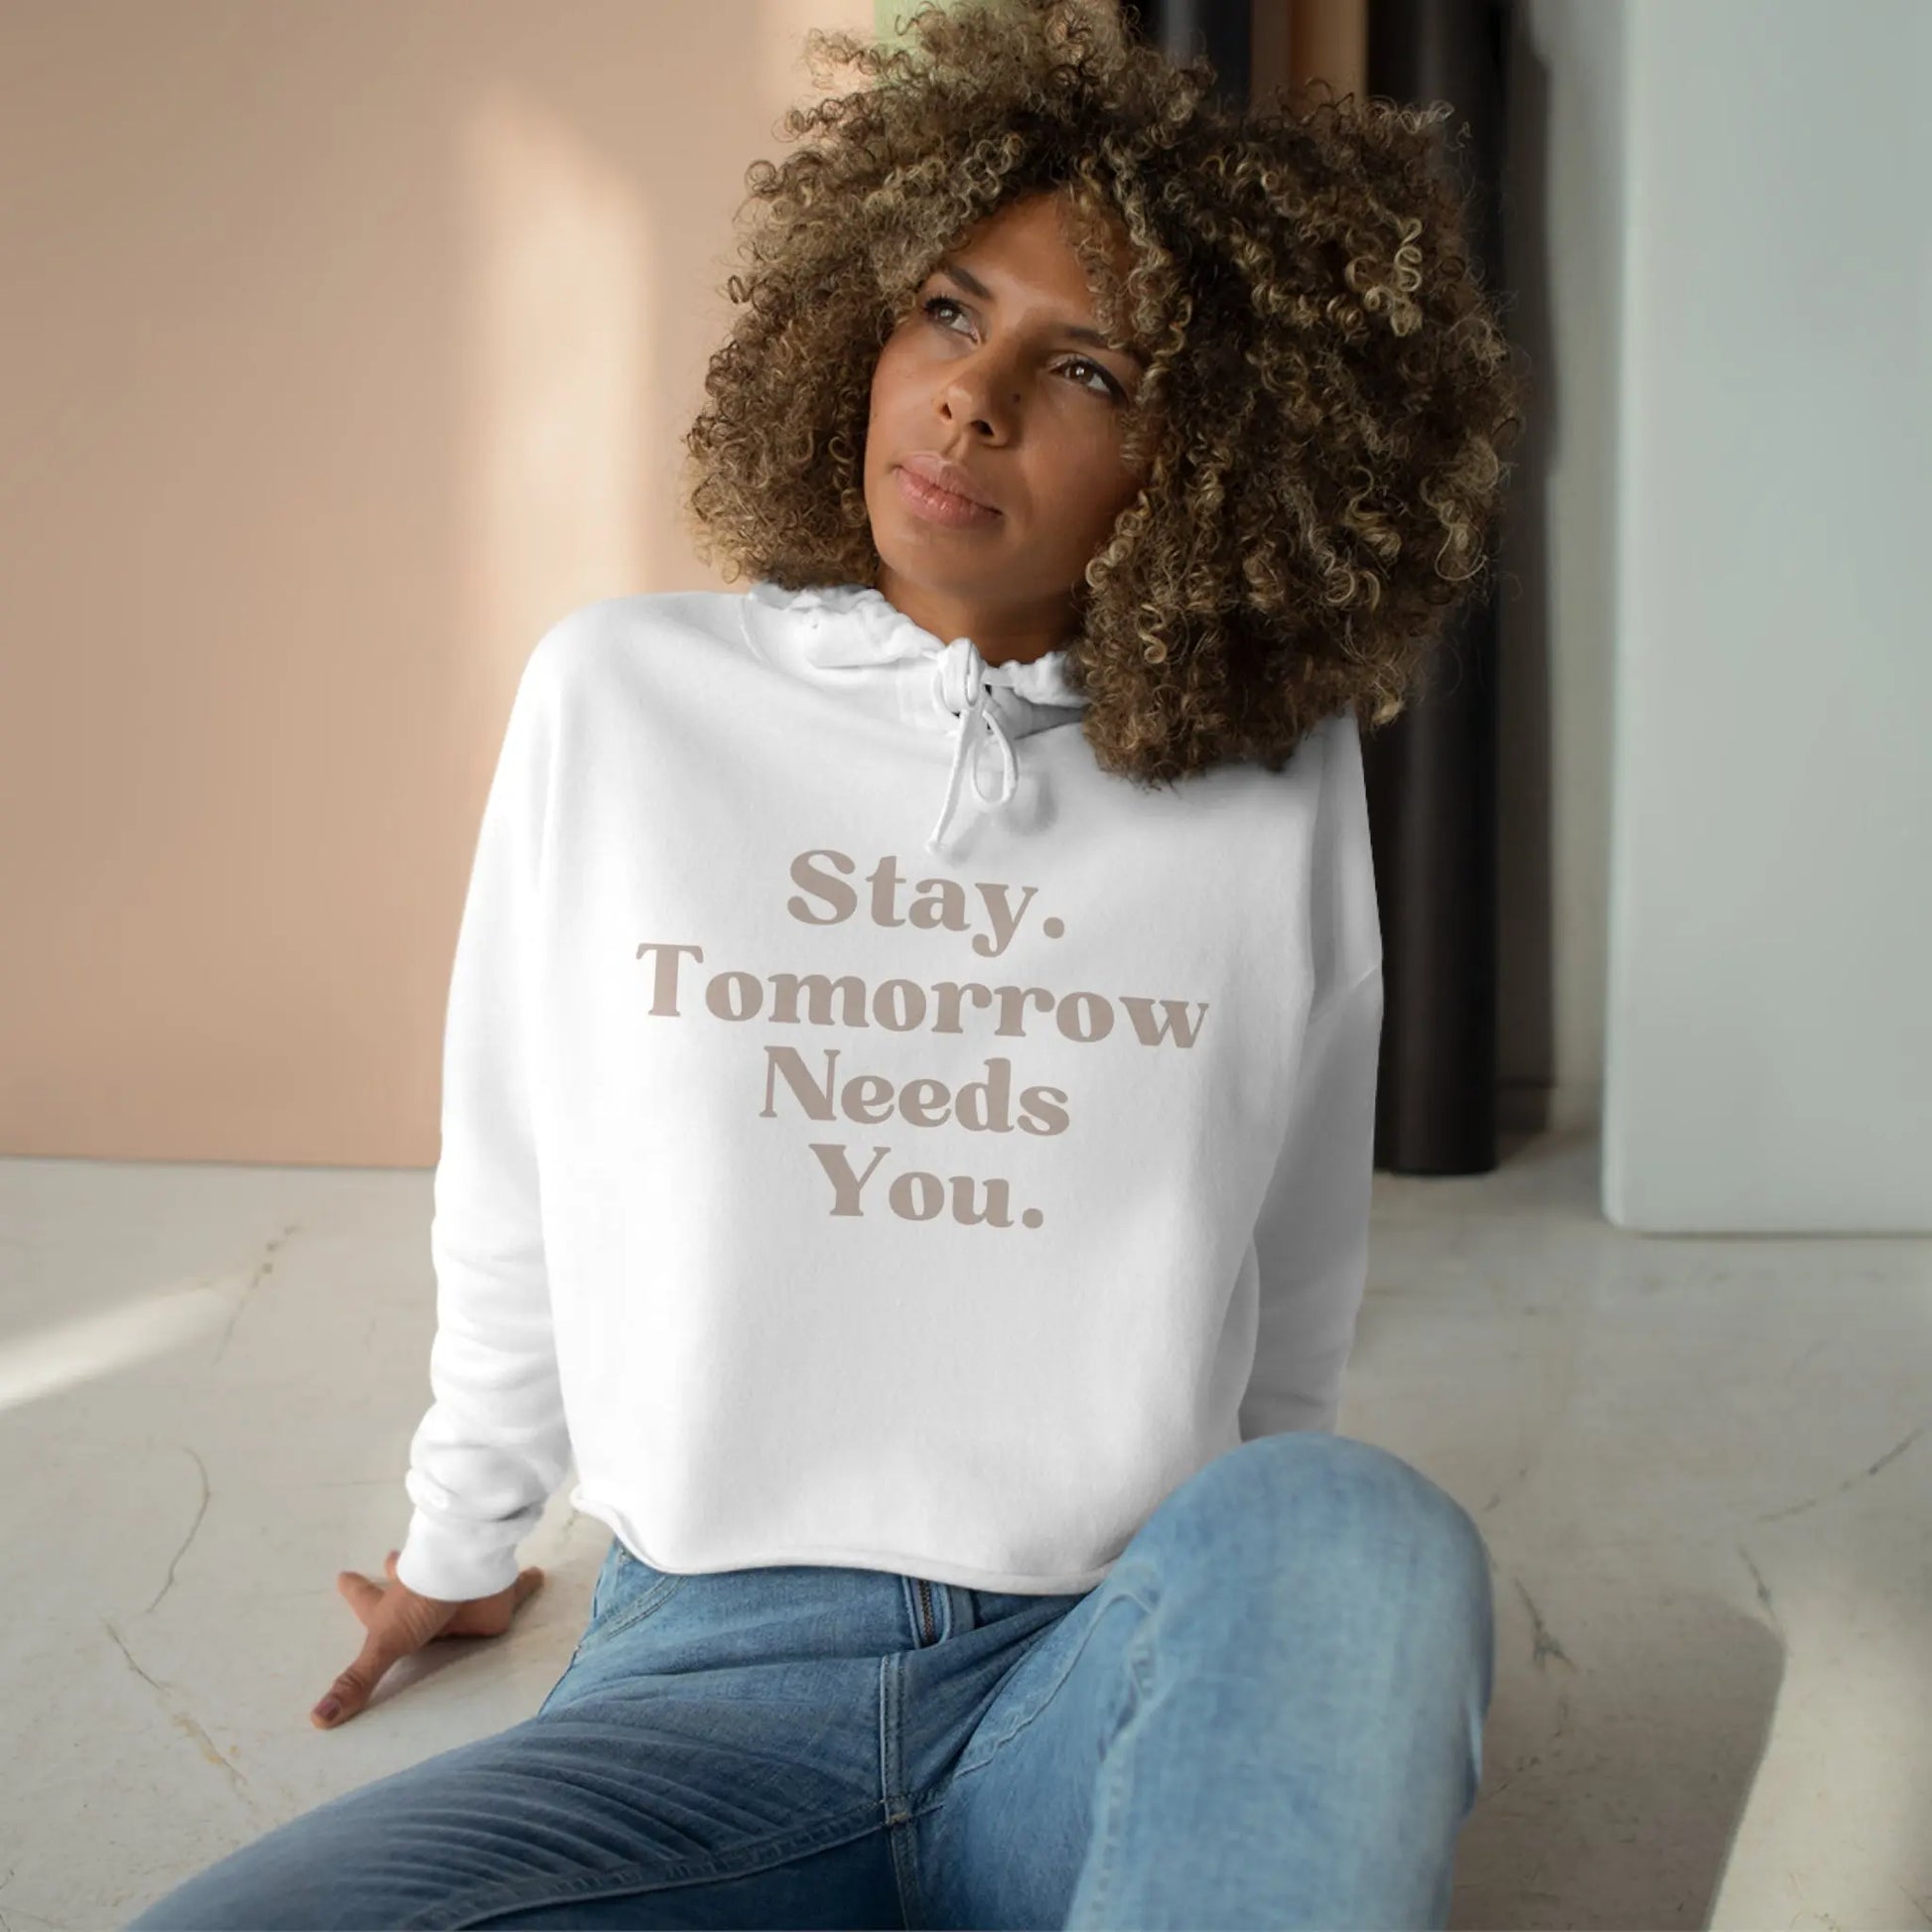 Suicide Awareness Stay Tomorrow Needs You Crop Hoodie - Perfect for Mother’s Day and spring! Spread awareness in style while supporting mental health. Shop now